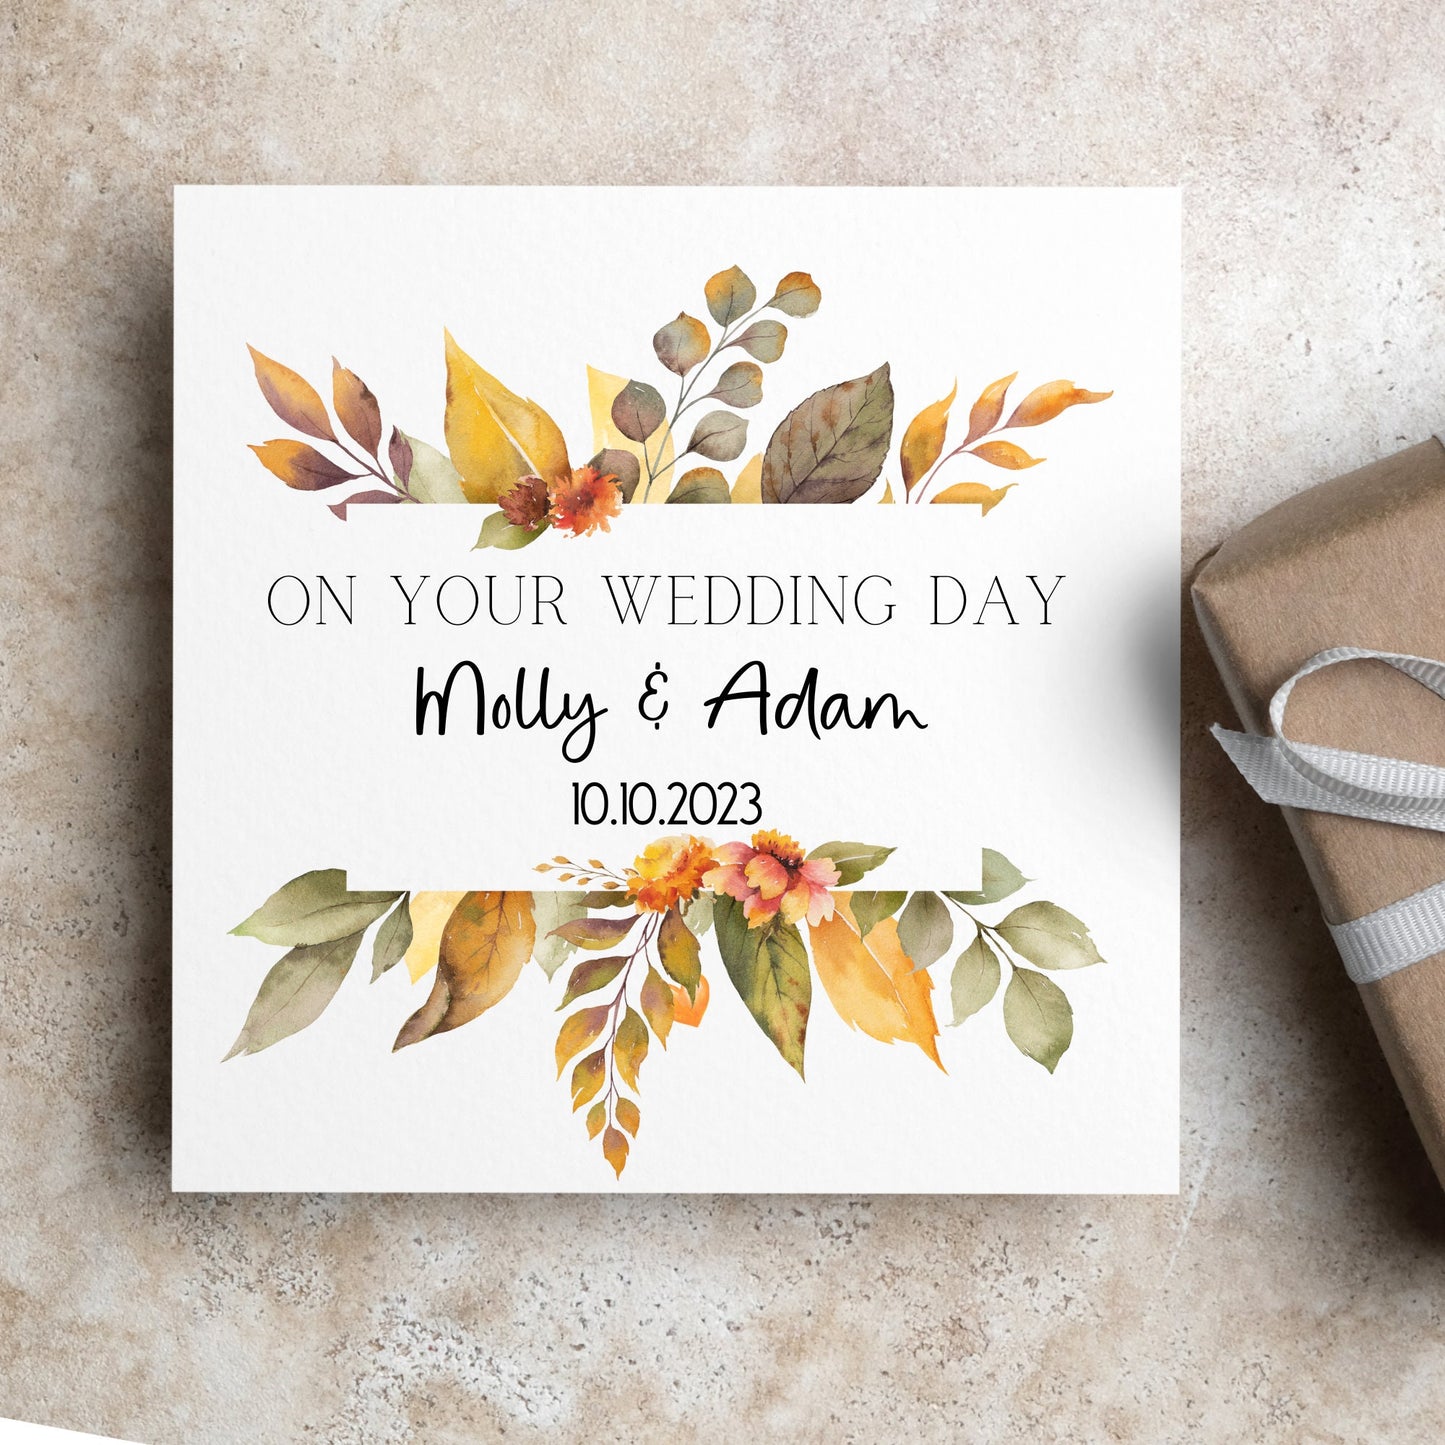 On your wedding day, autumn / fall wedding card personalised couples name and wedding date, autumn leaves